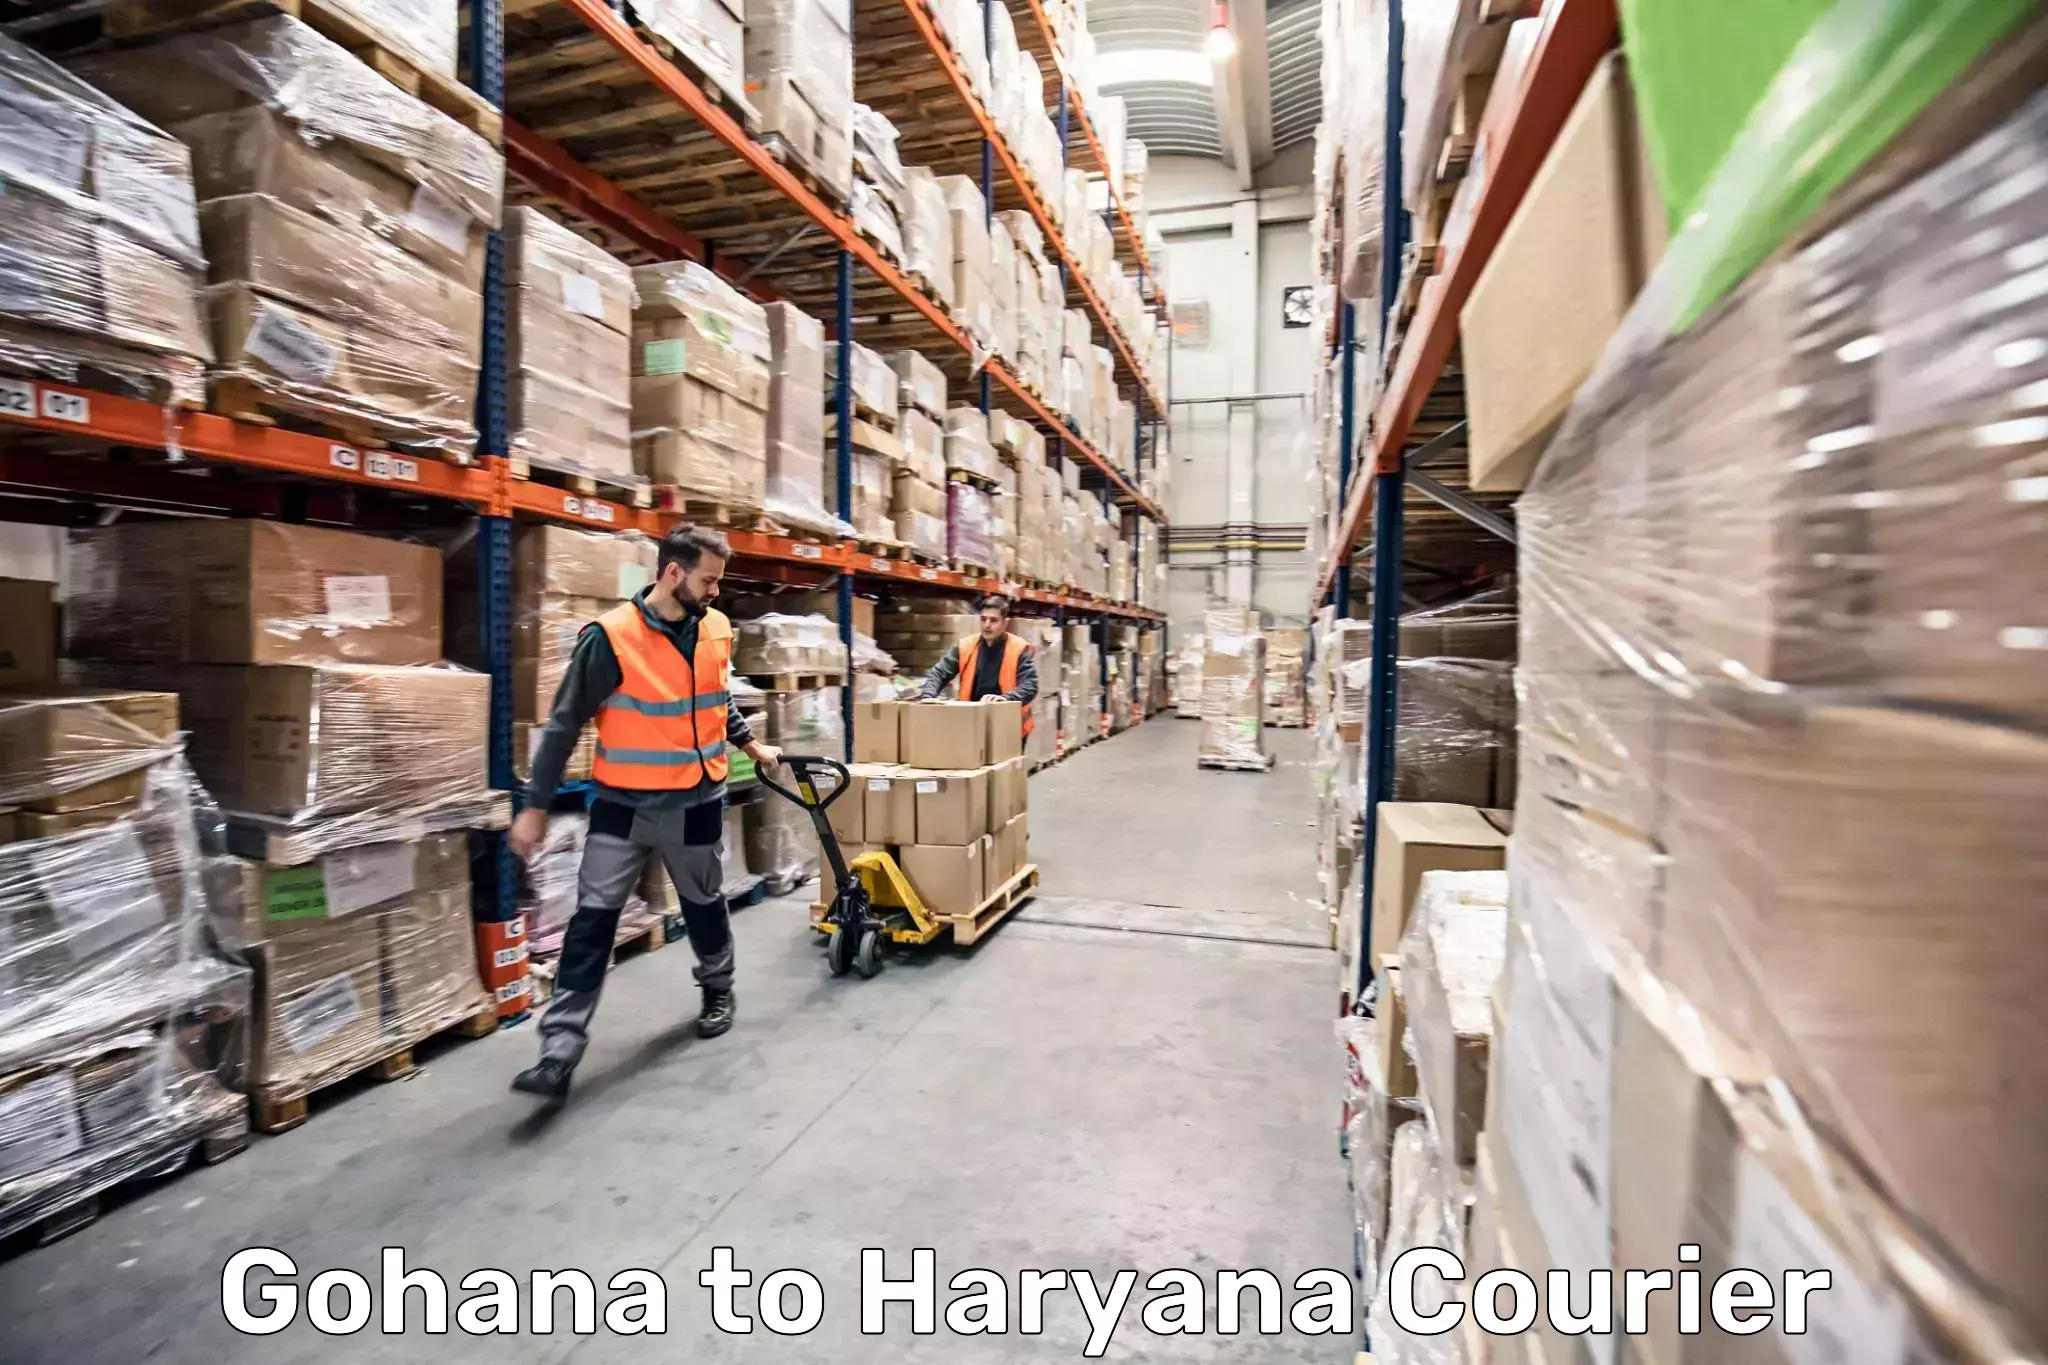 Instant baggage transport quote Gohana to NCR Haryana